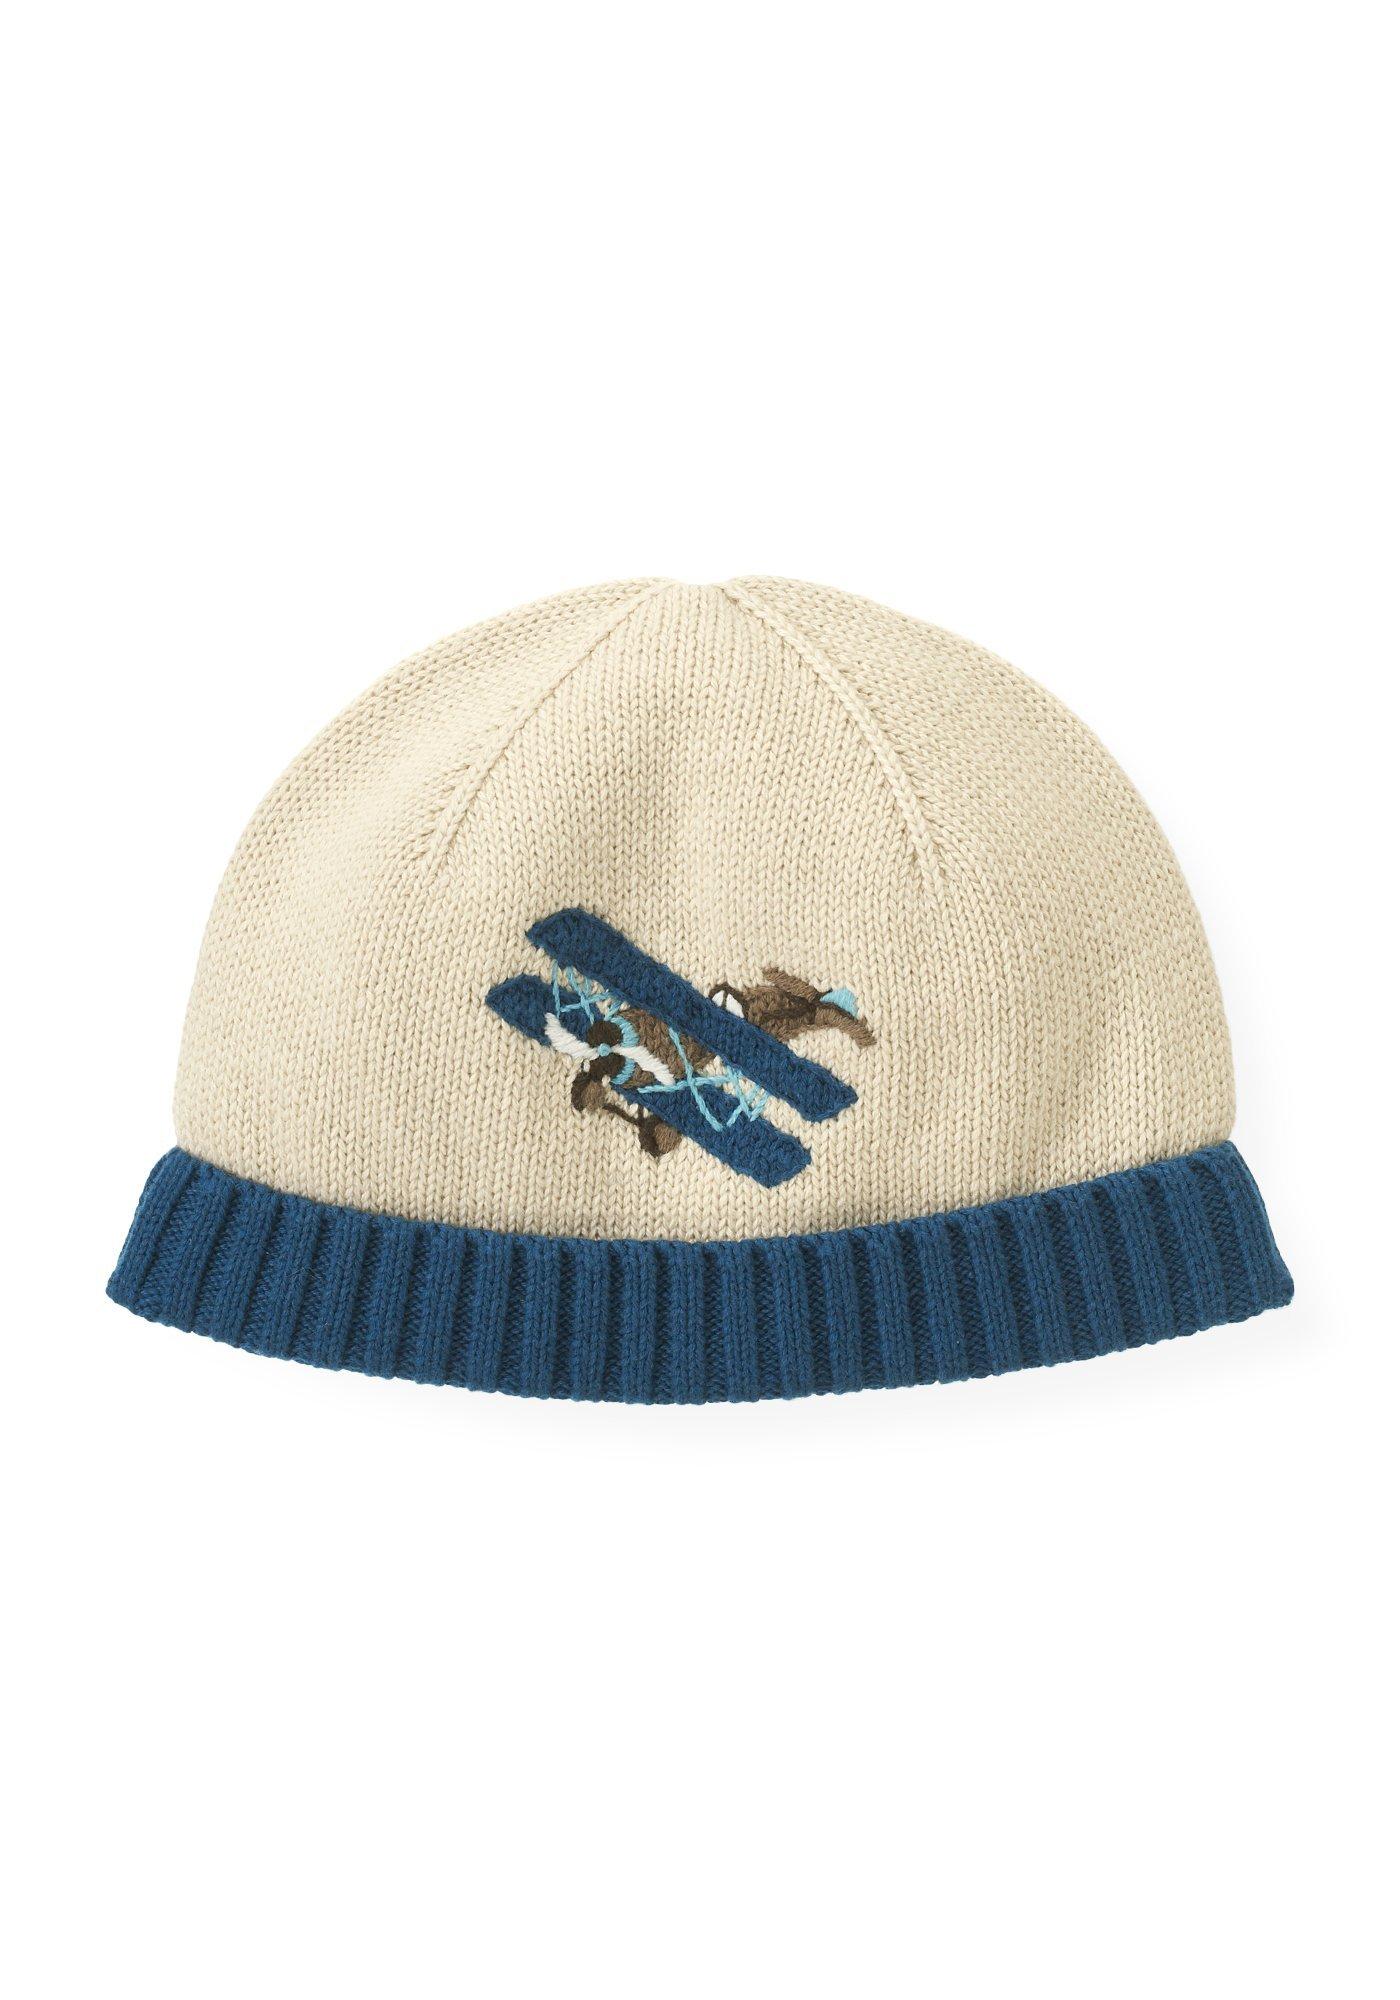 Airplane Sweater Hat image number 0